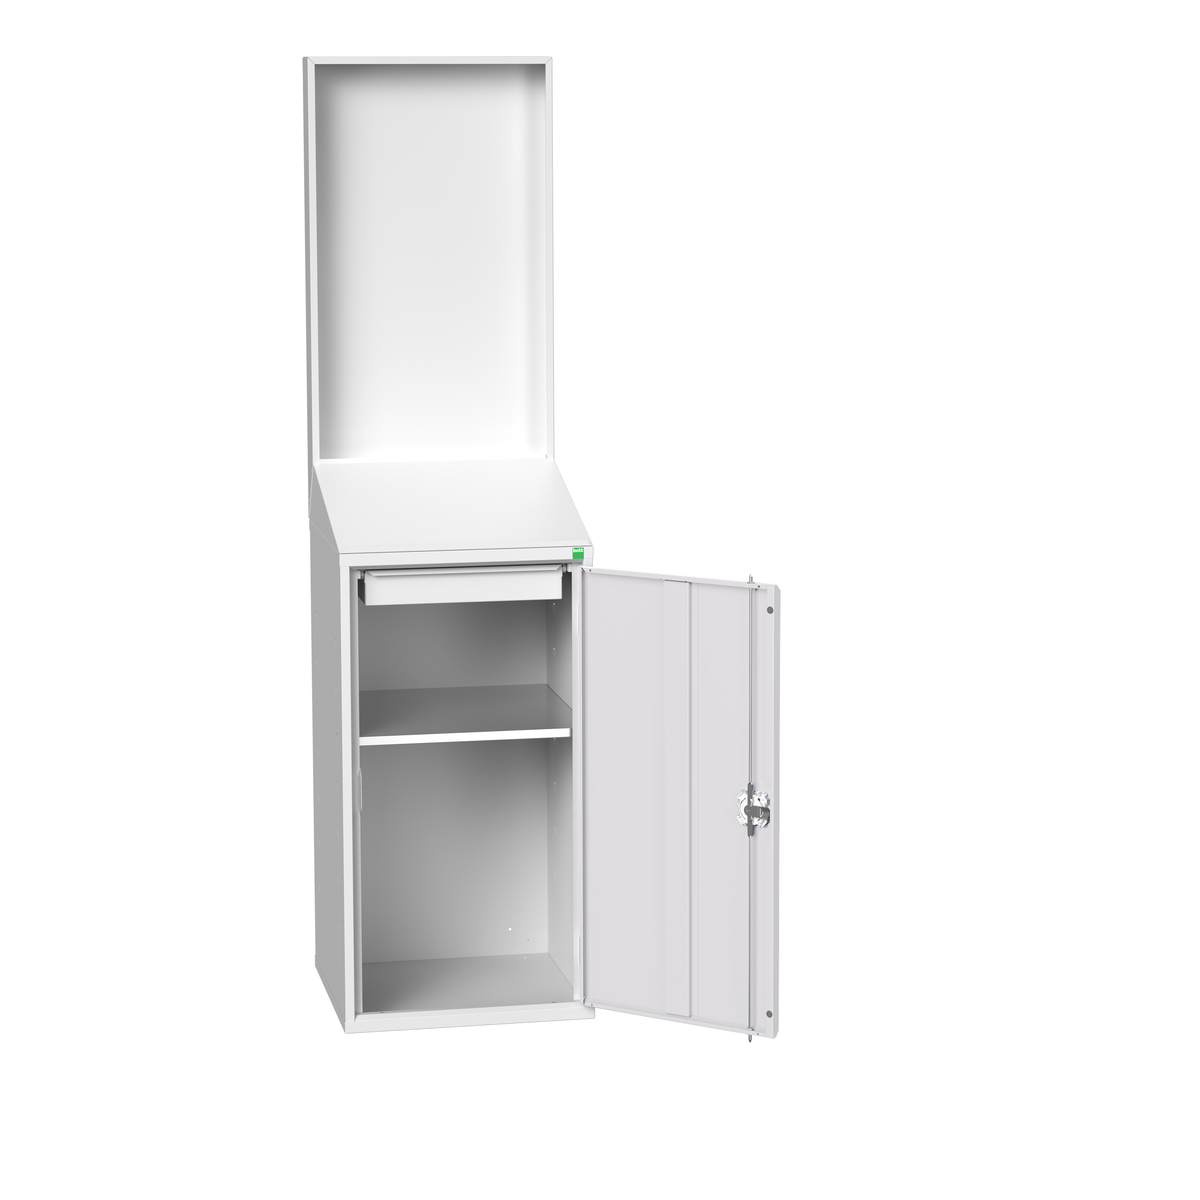 16929026.16 - verso economy lectern with backpanel